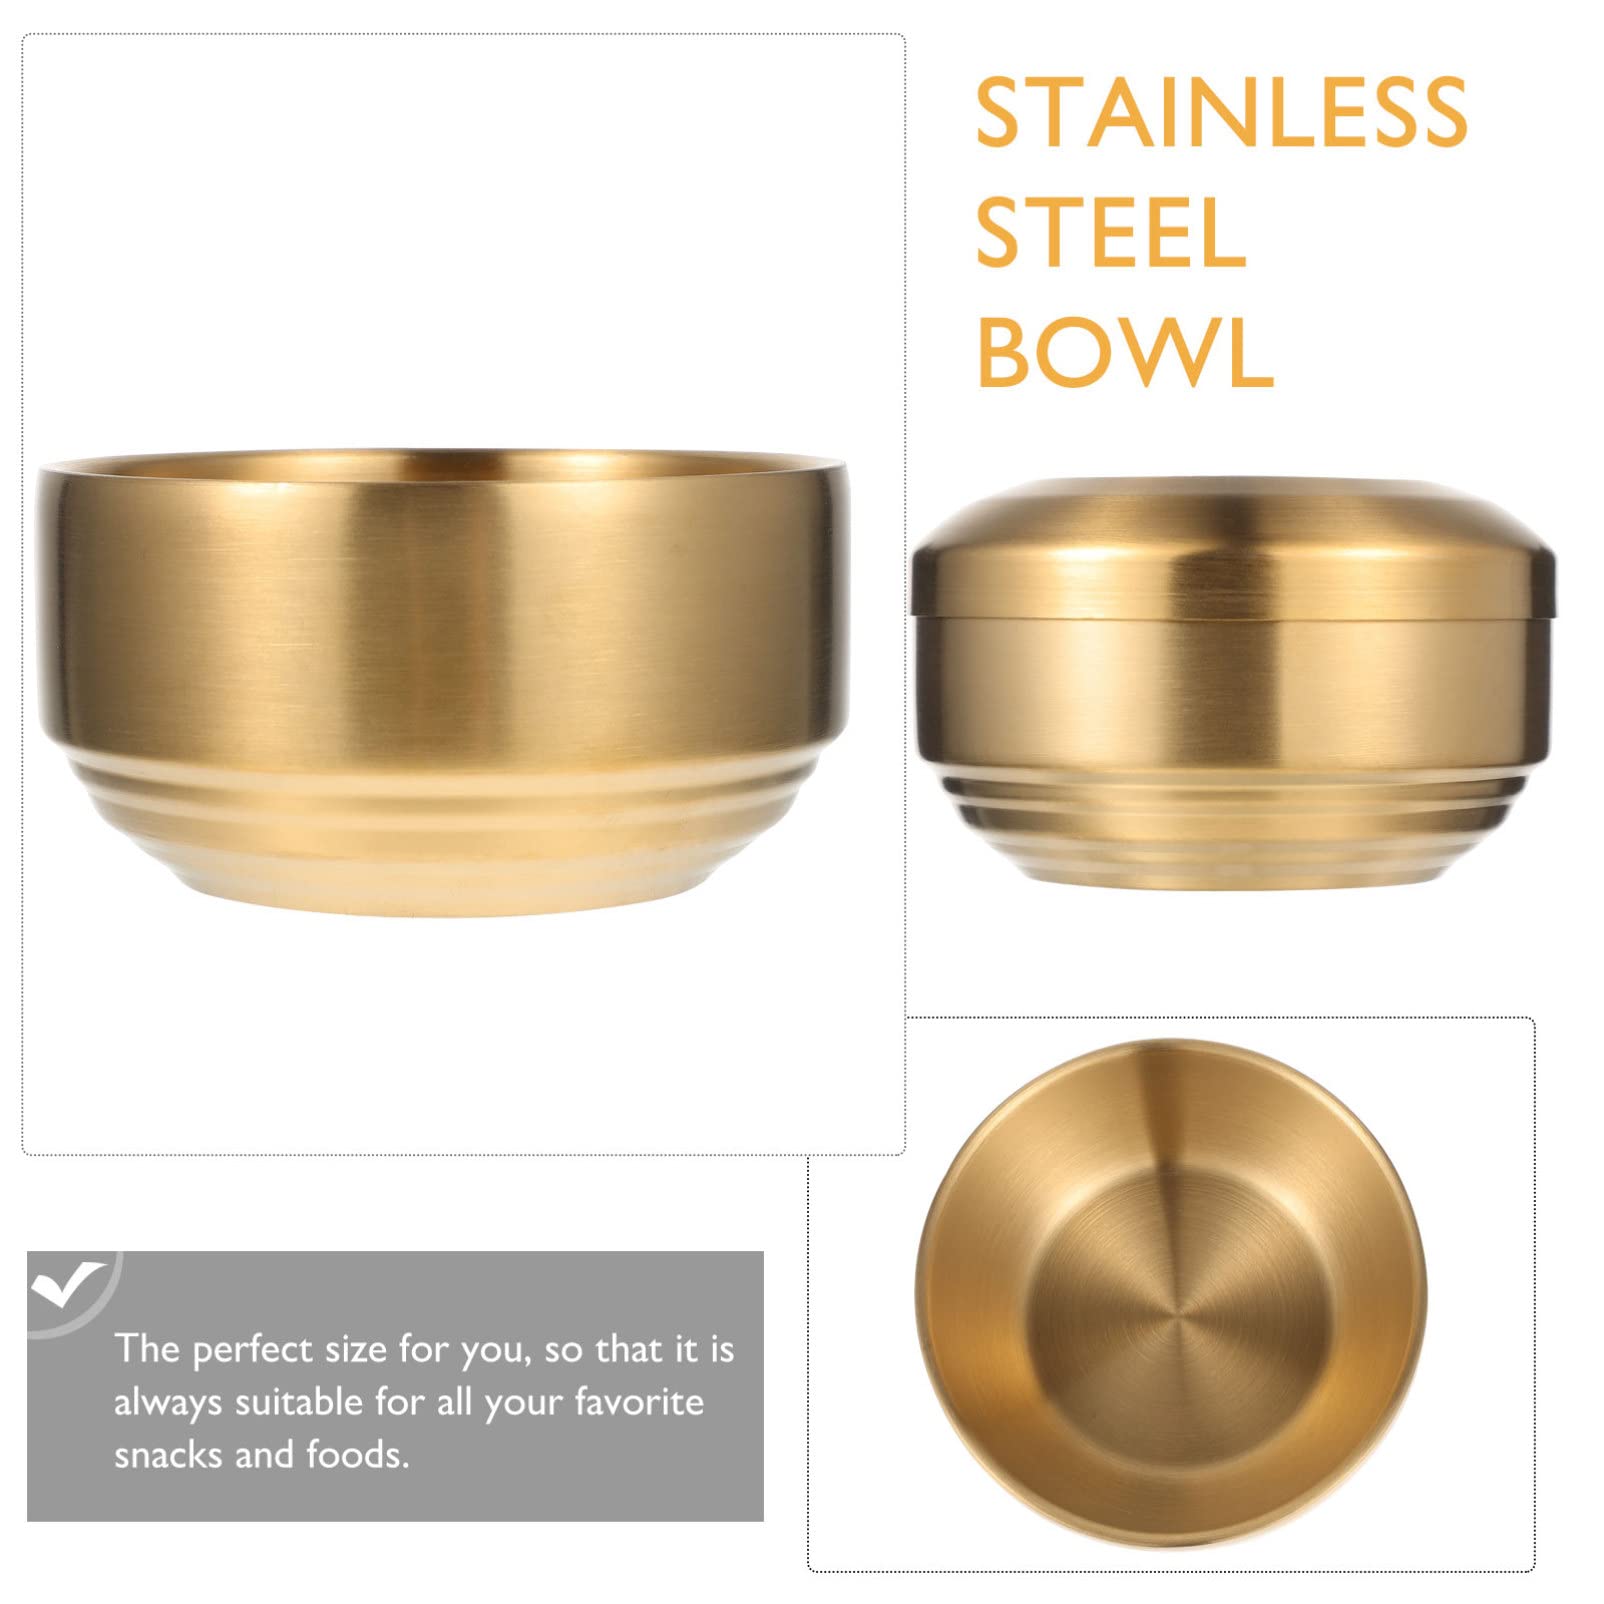 YARNOW Rice Washing Bowl Stainless Steel Rice Bowl with Lid, Vacuum Insulated Bowl with Lid, Double Layer Bowl with Lid, for Rice Soup Noodles Cereal (4.5 x 2.9 Inch, Golden) Rice Bowls